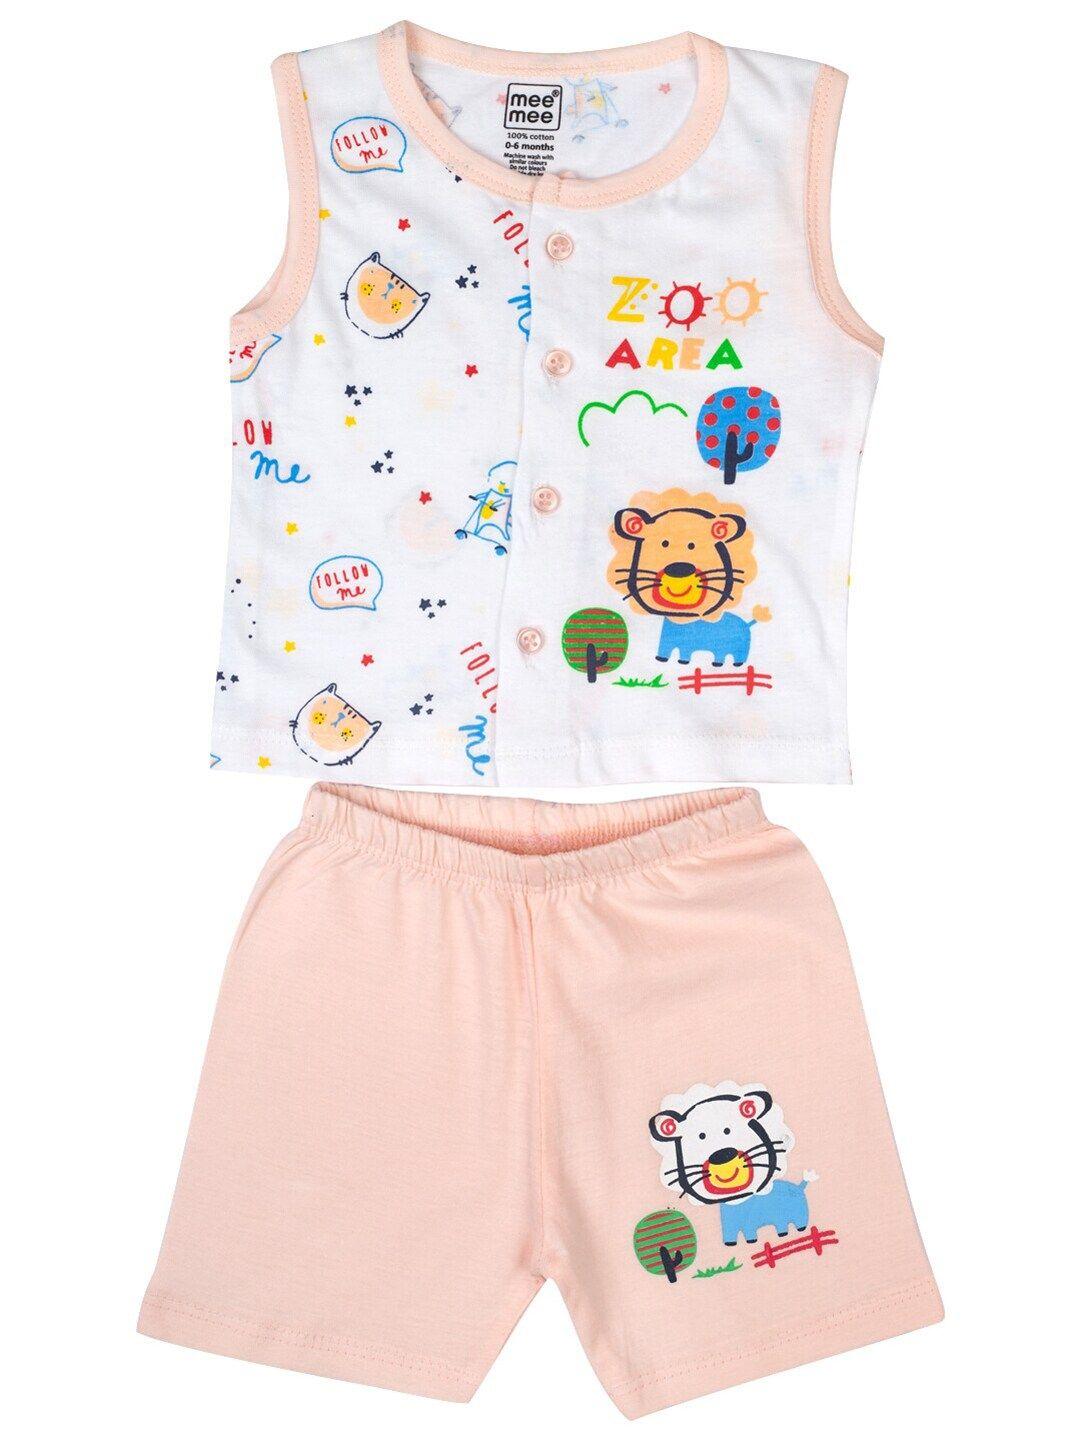 meemee boys peach-coloured & white printed top with shorts